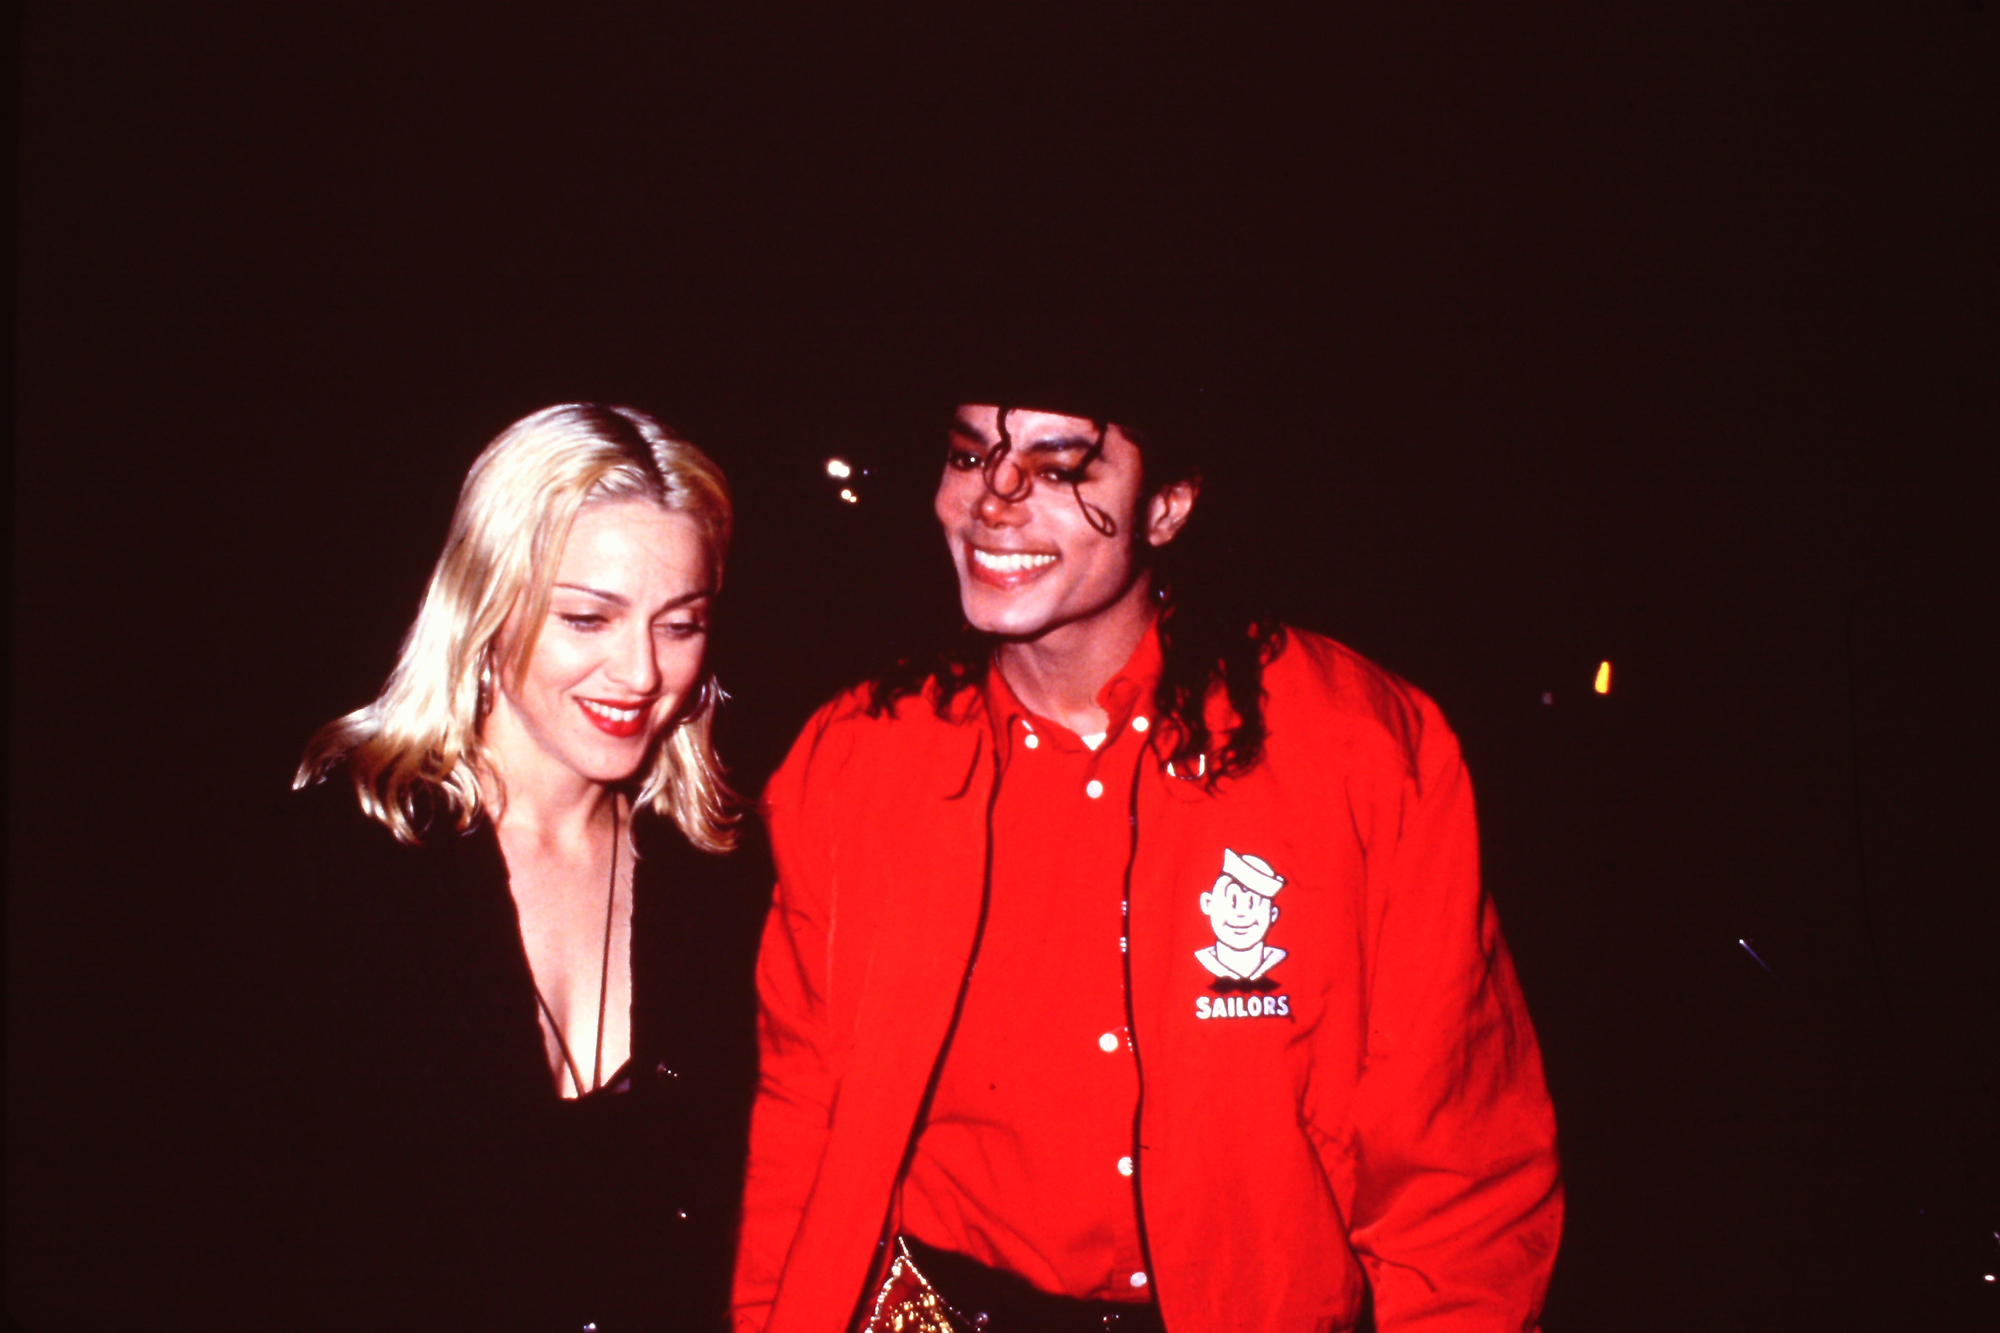 Lot 60 - More than 270 color slides of Madonna, pictured here with Michael Jackson. Activity Auctions image